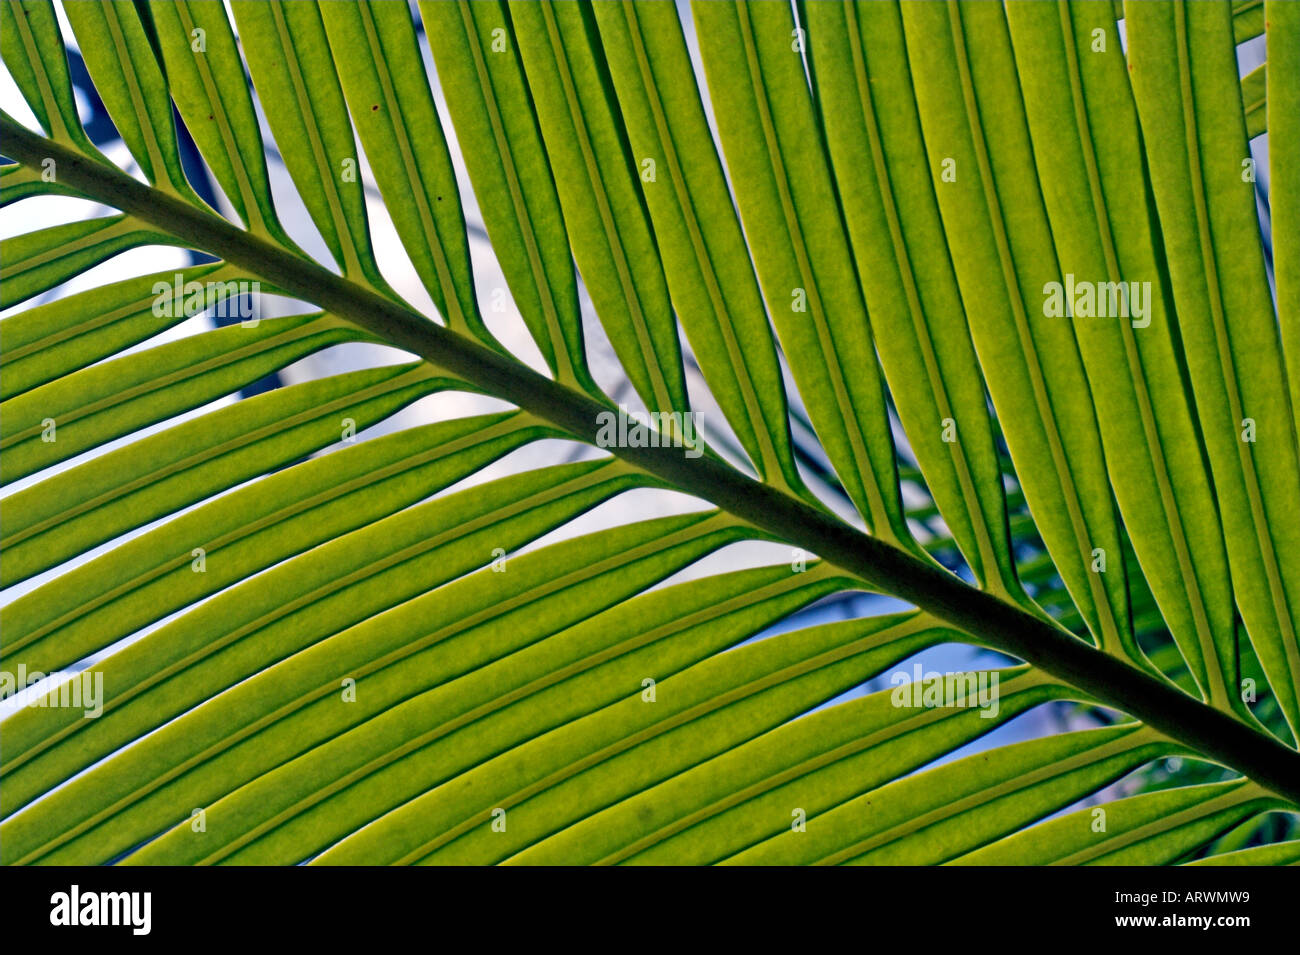 Leaves Of The Sago Palm Or Cycas Circinalis In The Botanical Gardens In Sofia In Bulgaria Stock Photo